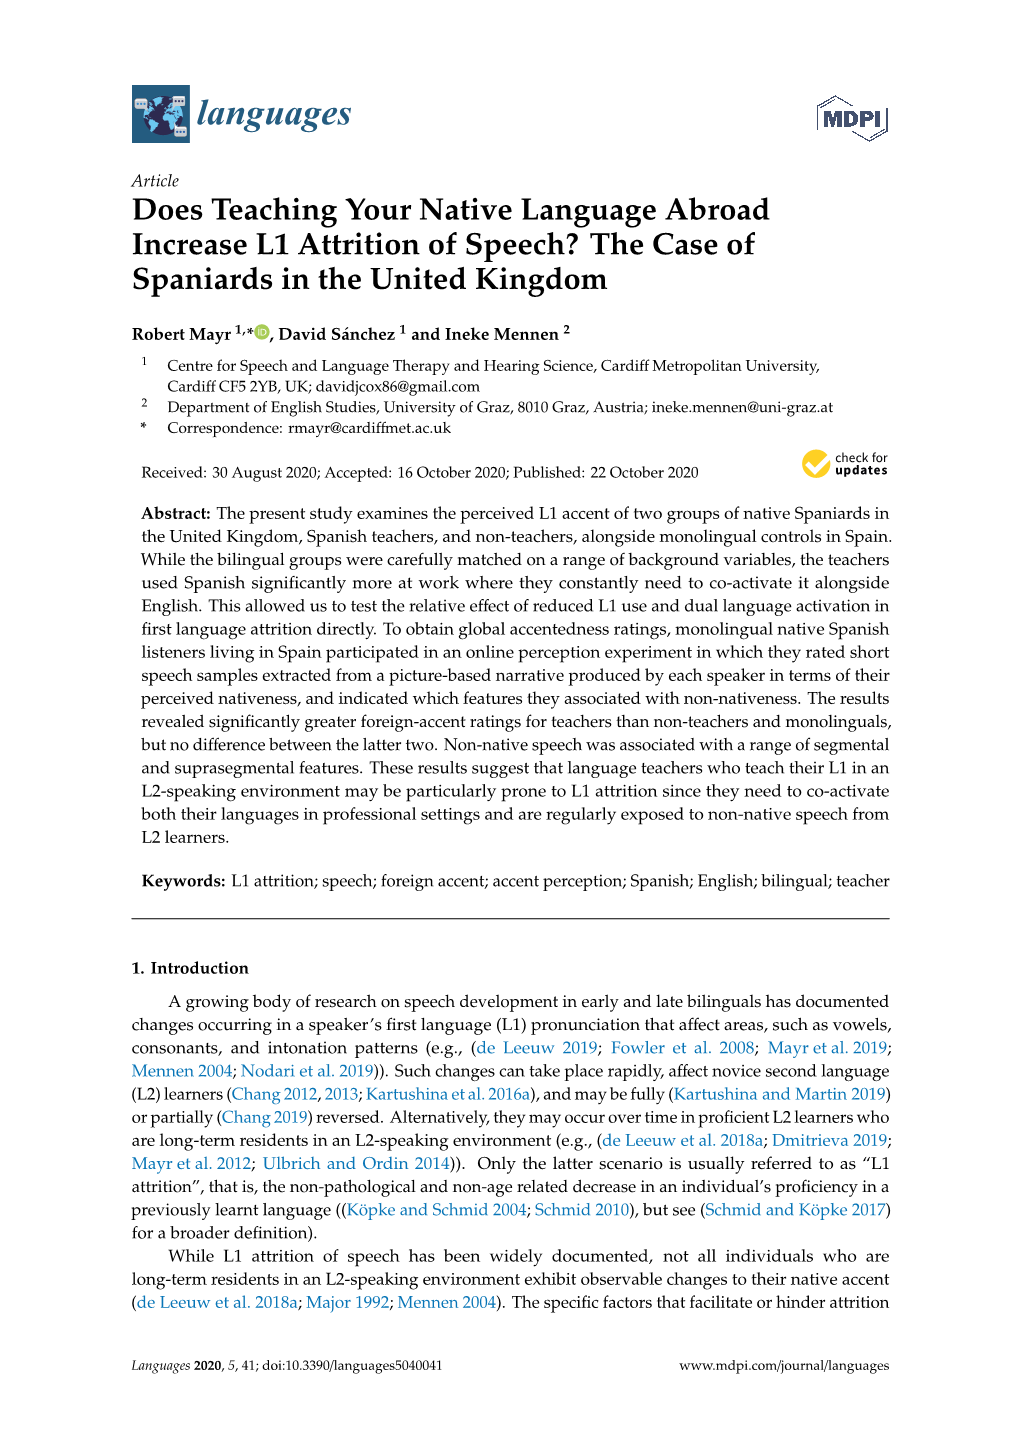 Does Teaching Your Native Language Abroad Increase L1 Attrition of Speech? the Case of Spaniards in the United Kingdom